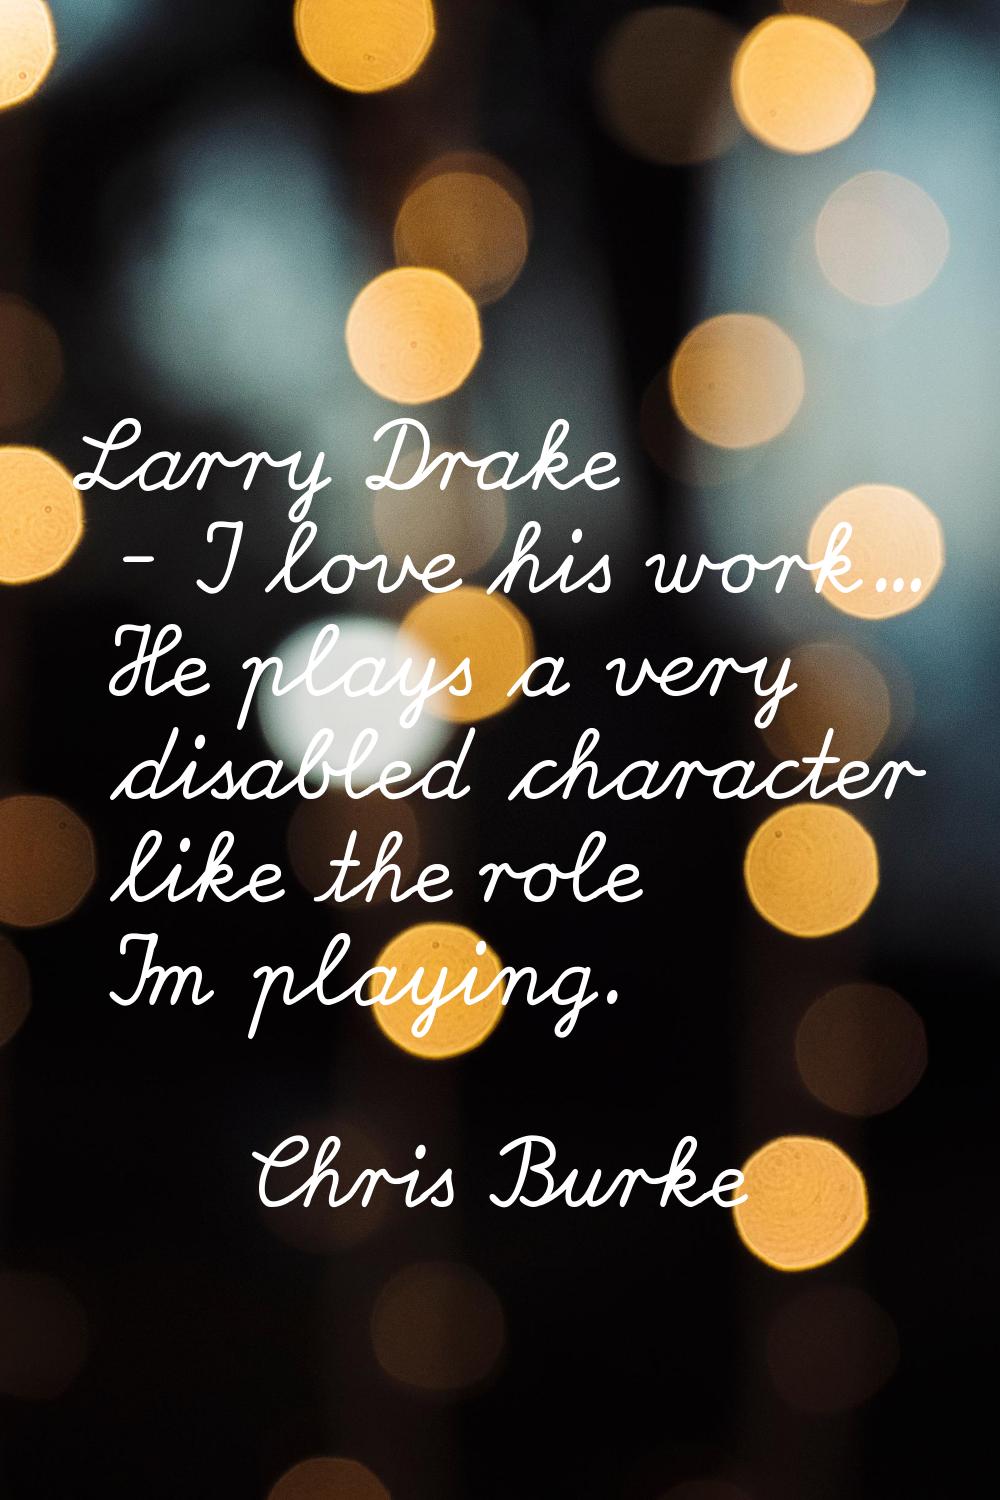 Larry Drake - I love his work... He plays a very disabled character like the role I'm playing.